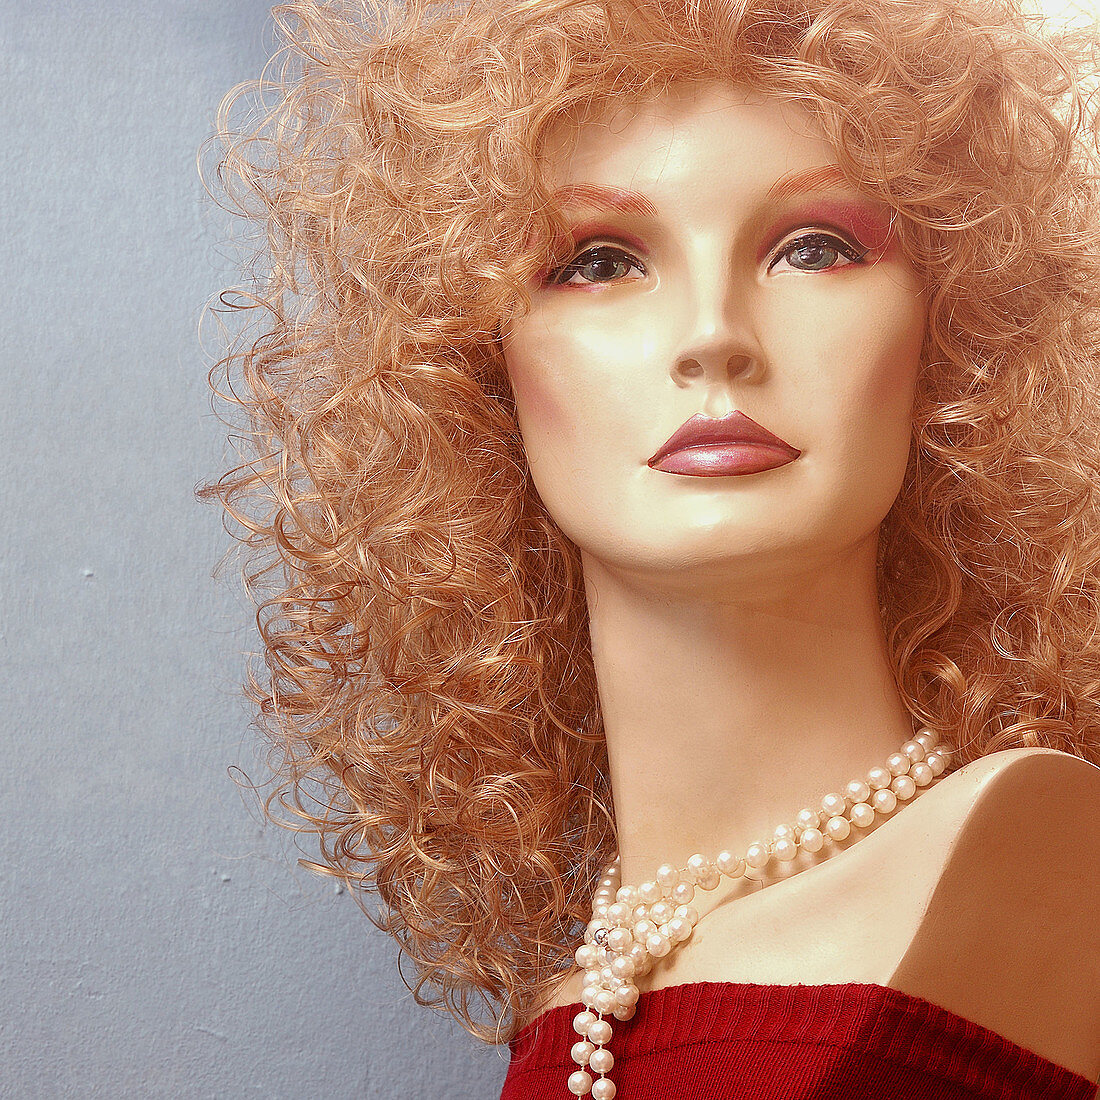 Blonde, Blondes, Bust, Busts, Color, Colour, Curly hair, Daytime, Dummies, Dummy, Exterior, Fair-haired, Female, Mannequin, Mannequins, Necklace, Necklaces, Odd, Outdoor, Outdoors, Outside, Pearl, Pearls, Strange, Woman, Women, T83-552717, agefotostock